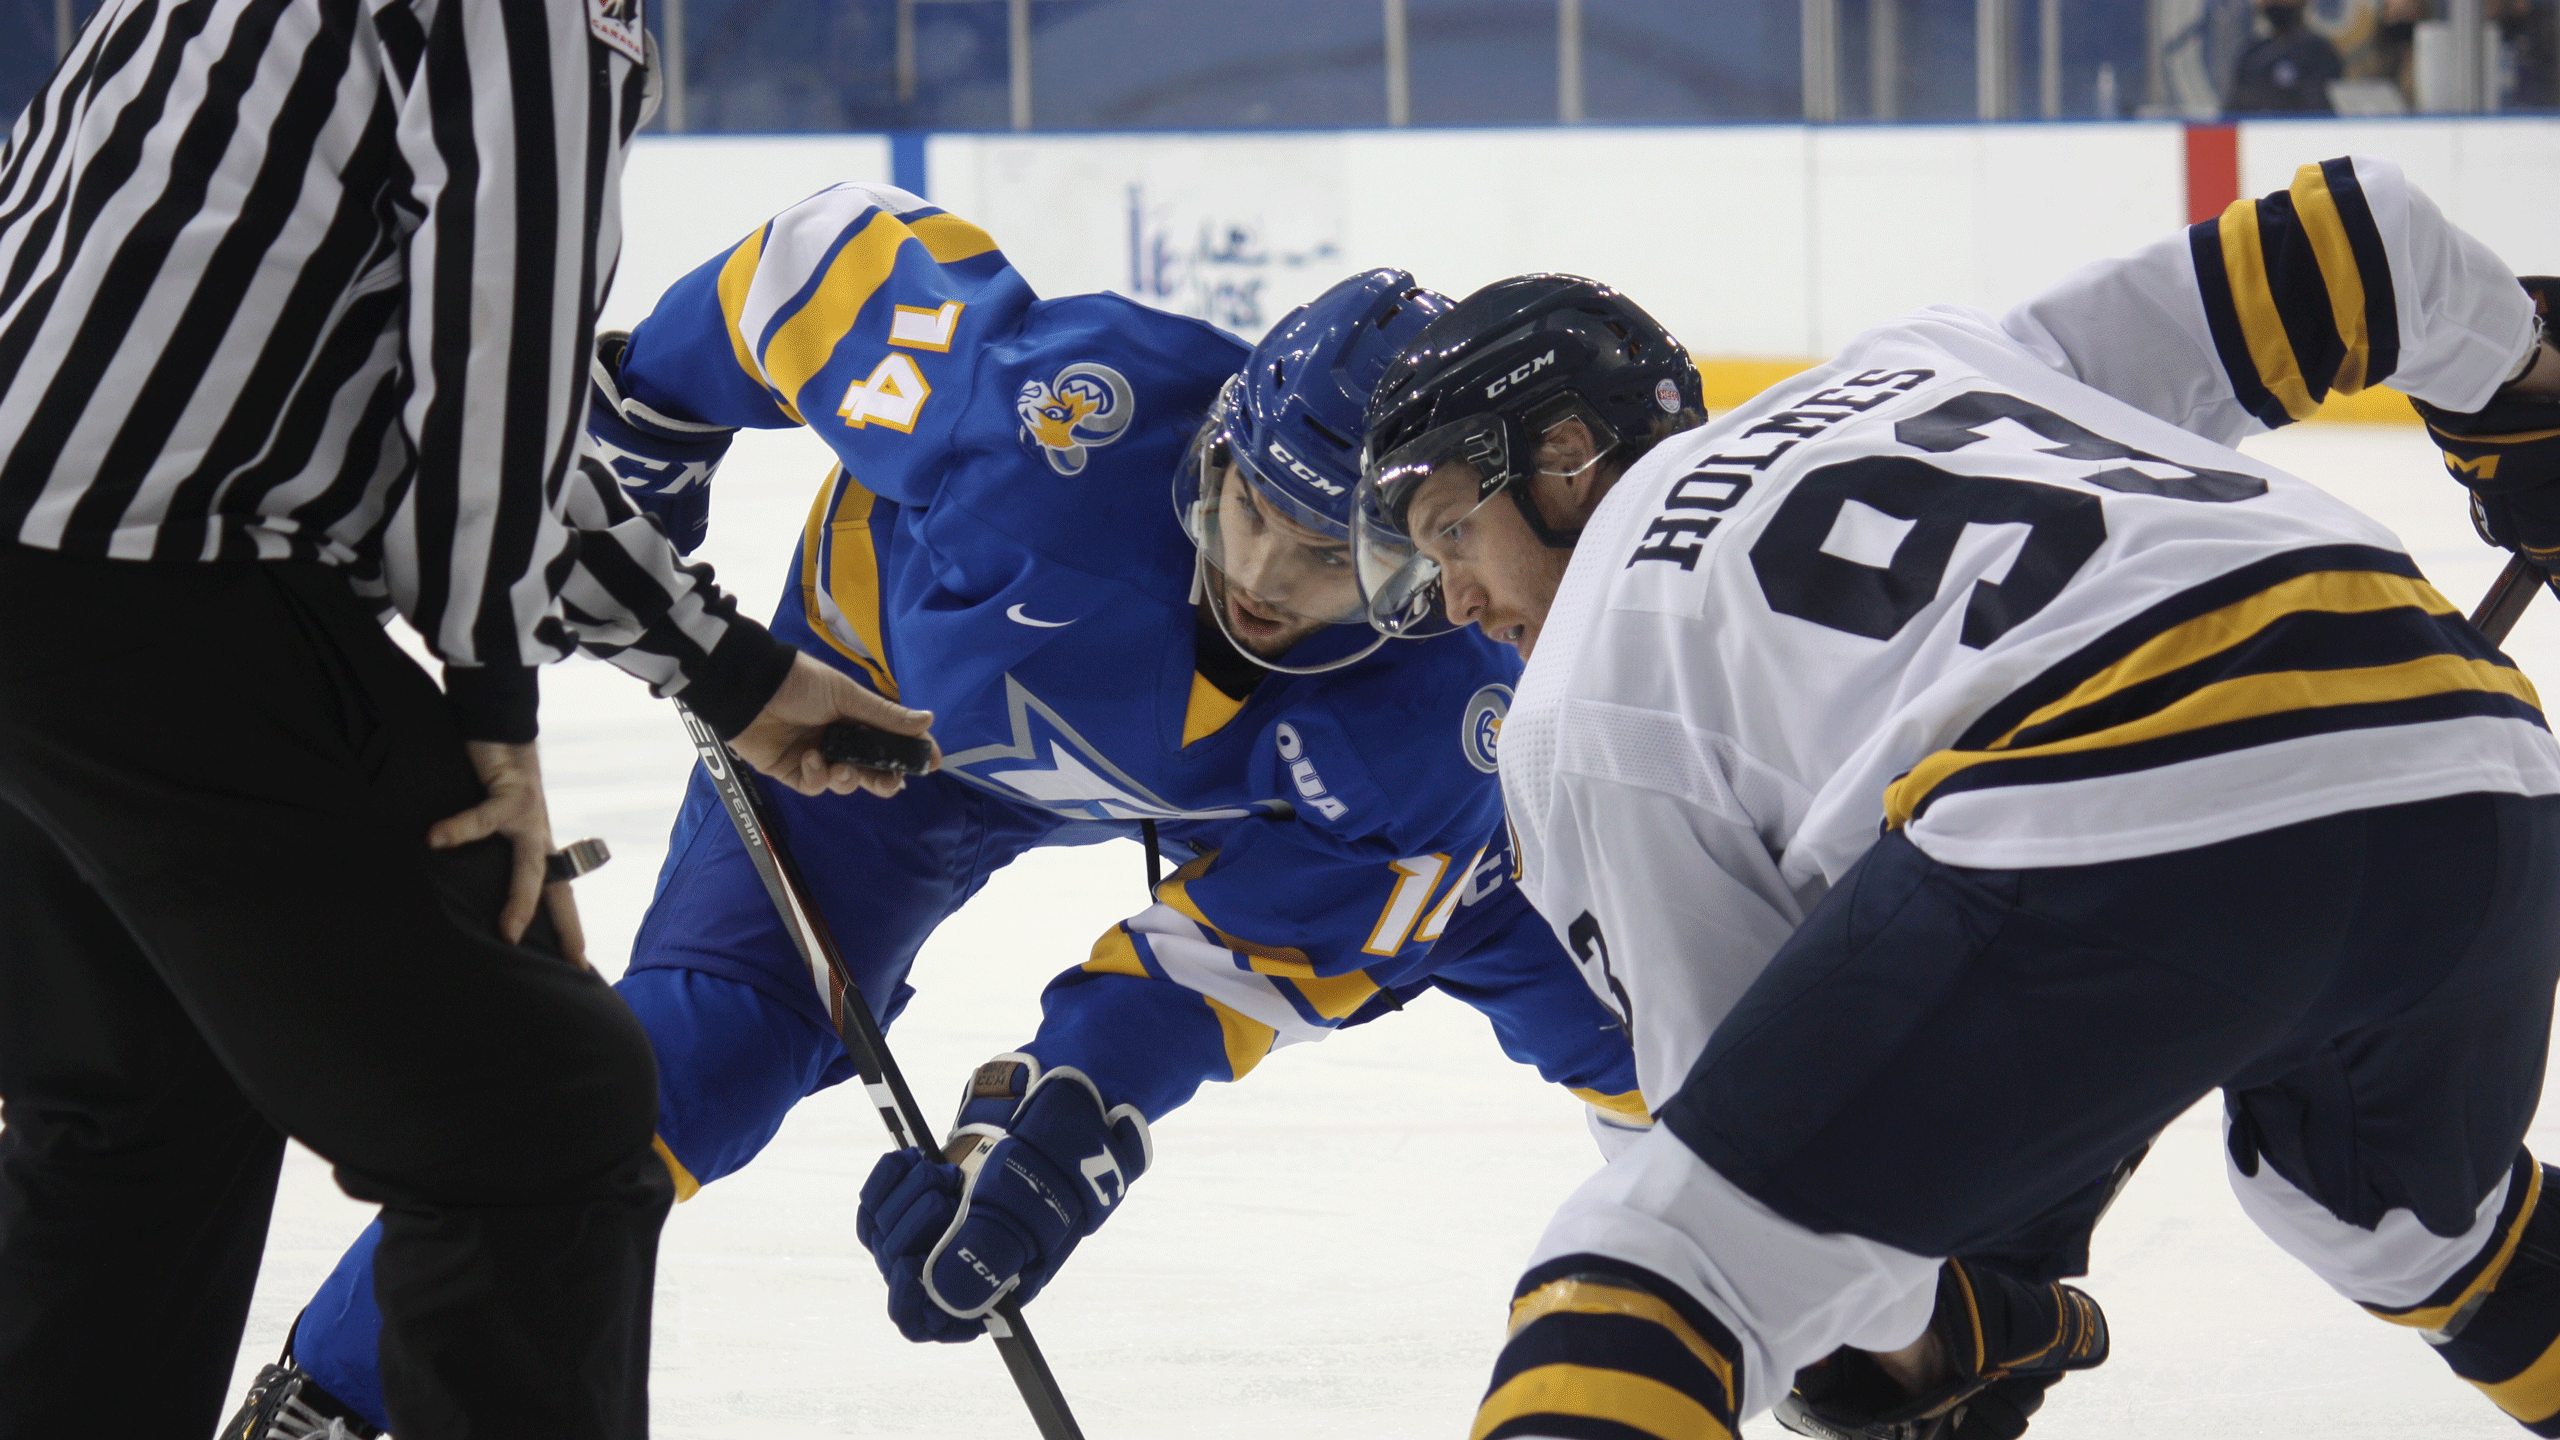 A Rams men's hockey player in a blue jersey lines up against his opponent